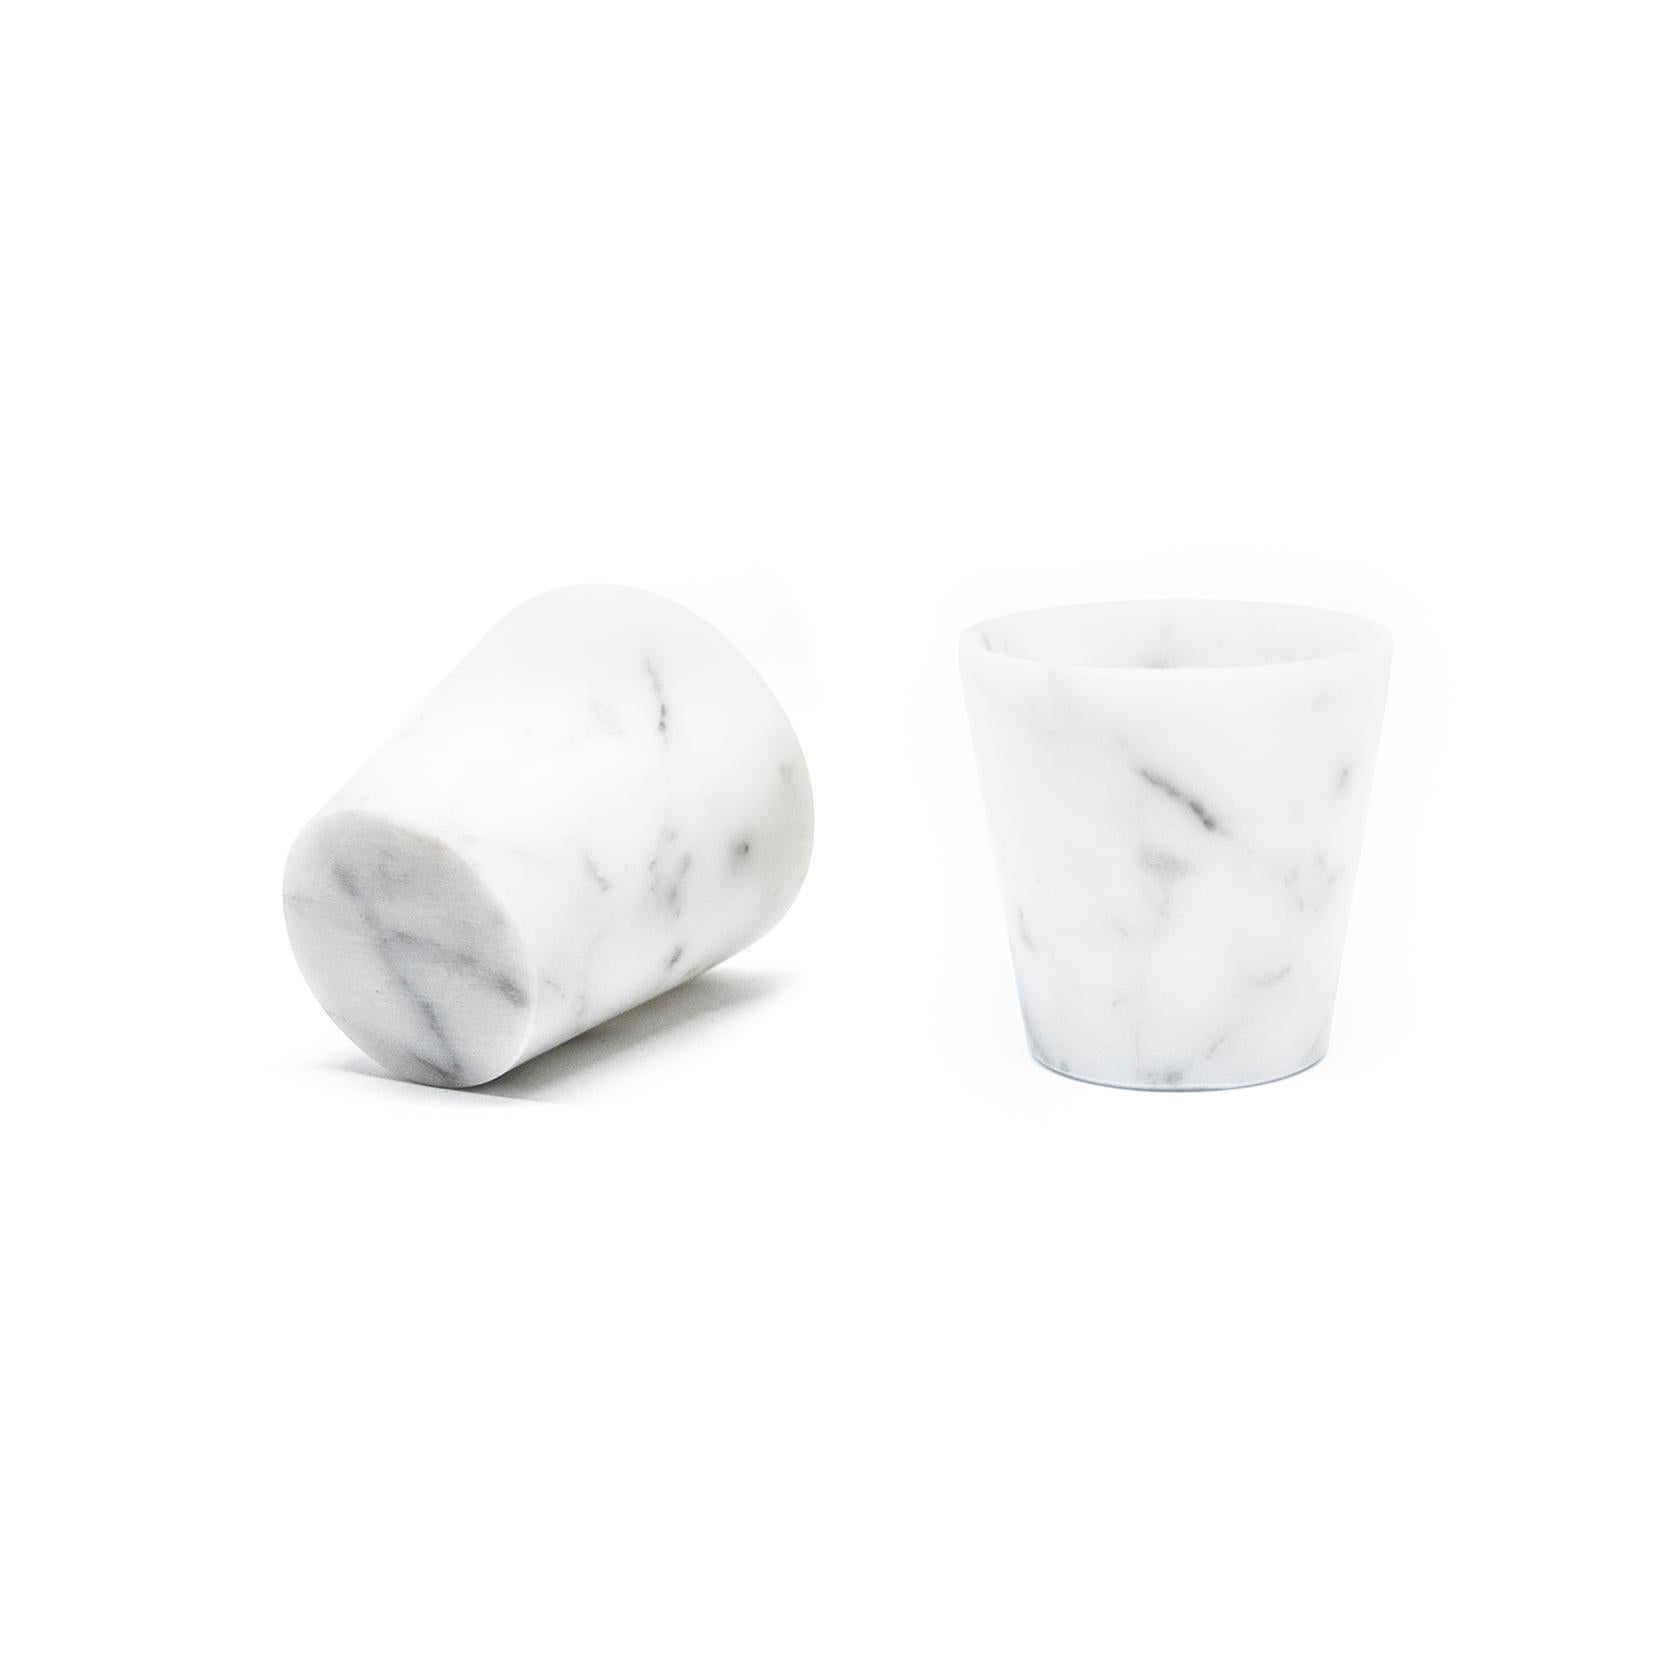 Handmade Set of 2 Grappa Glasses in Satin White Carrara Marble For Sale 1